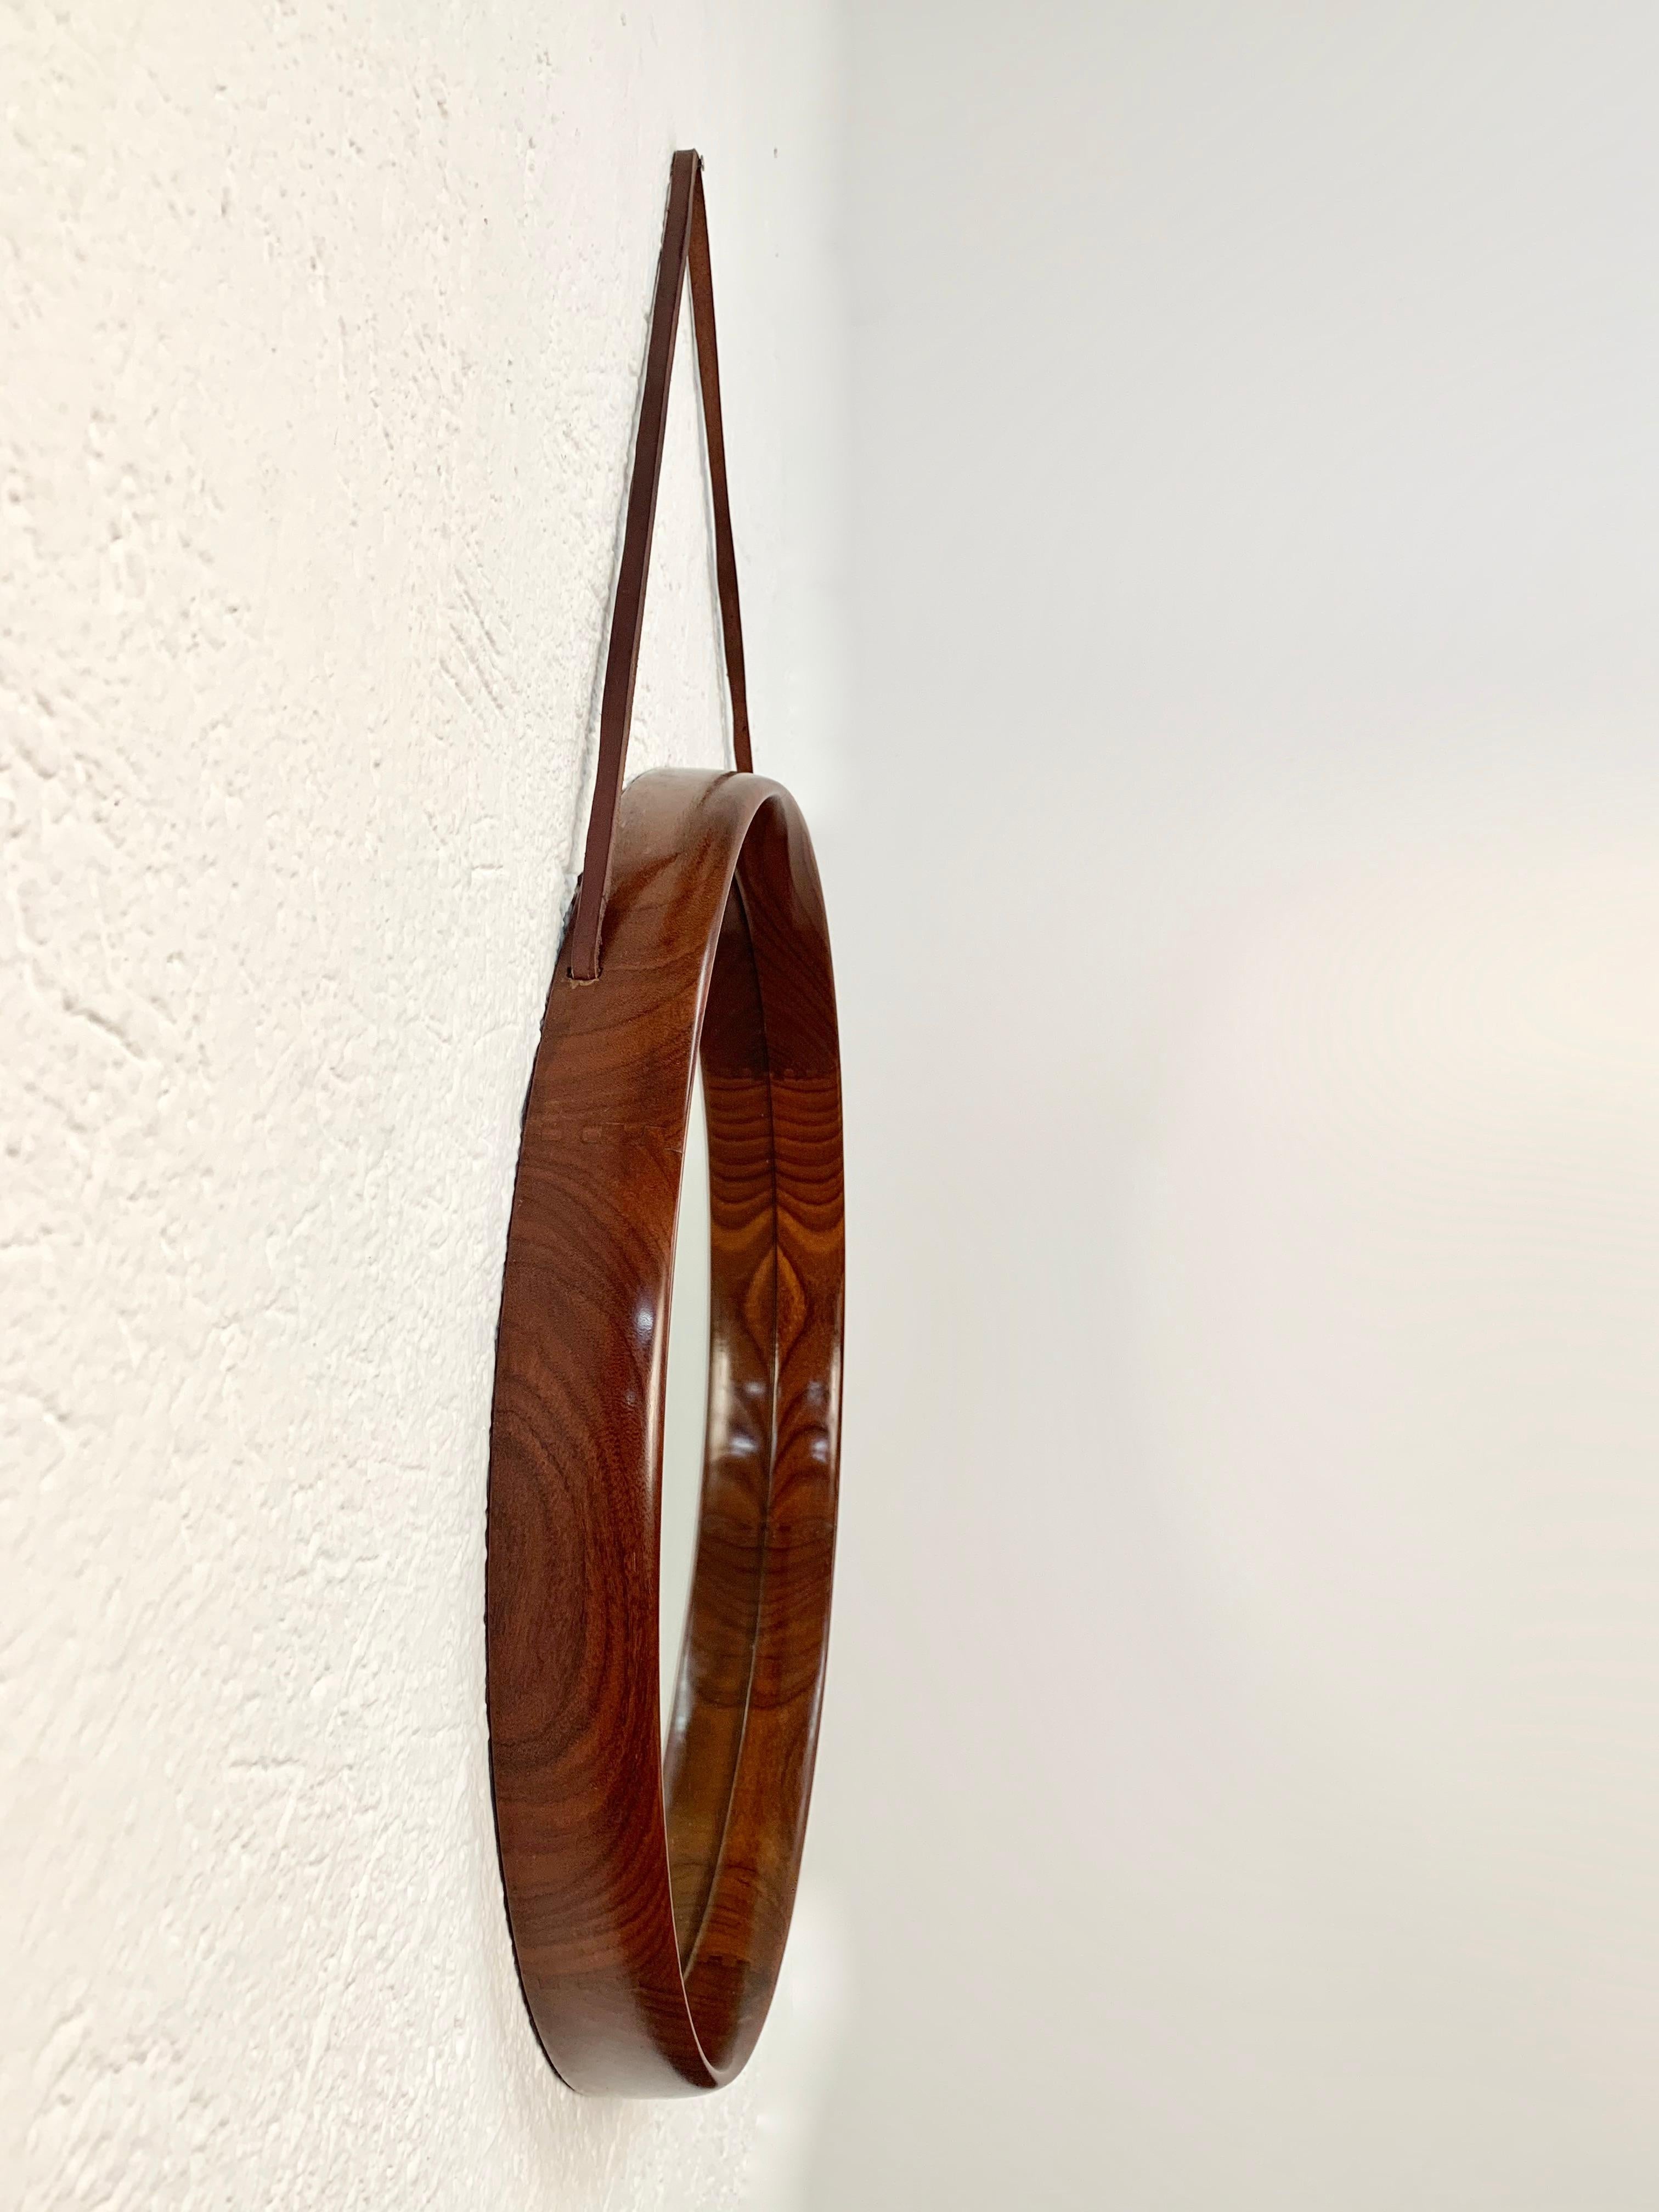 Teak and Leather Uno & Östen Kristiansson Swedish Wall Mirror for Luxus, 1960s For Sale 1